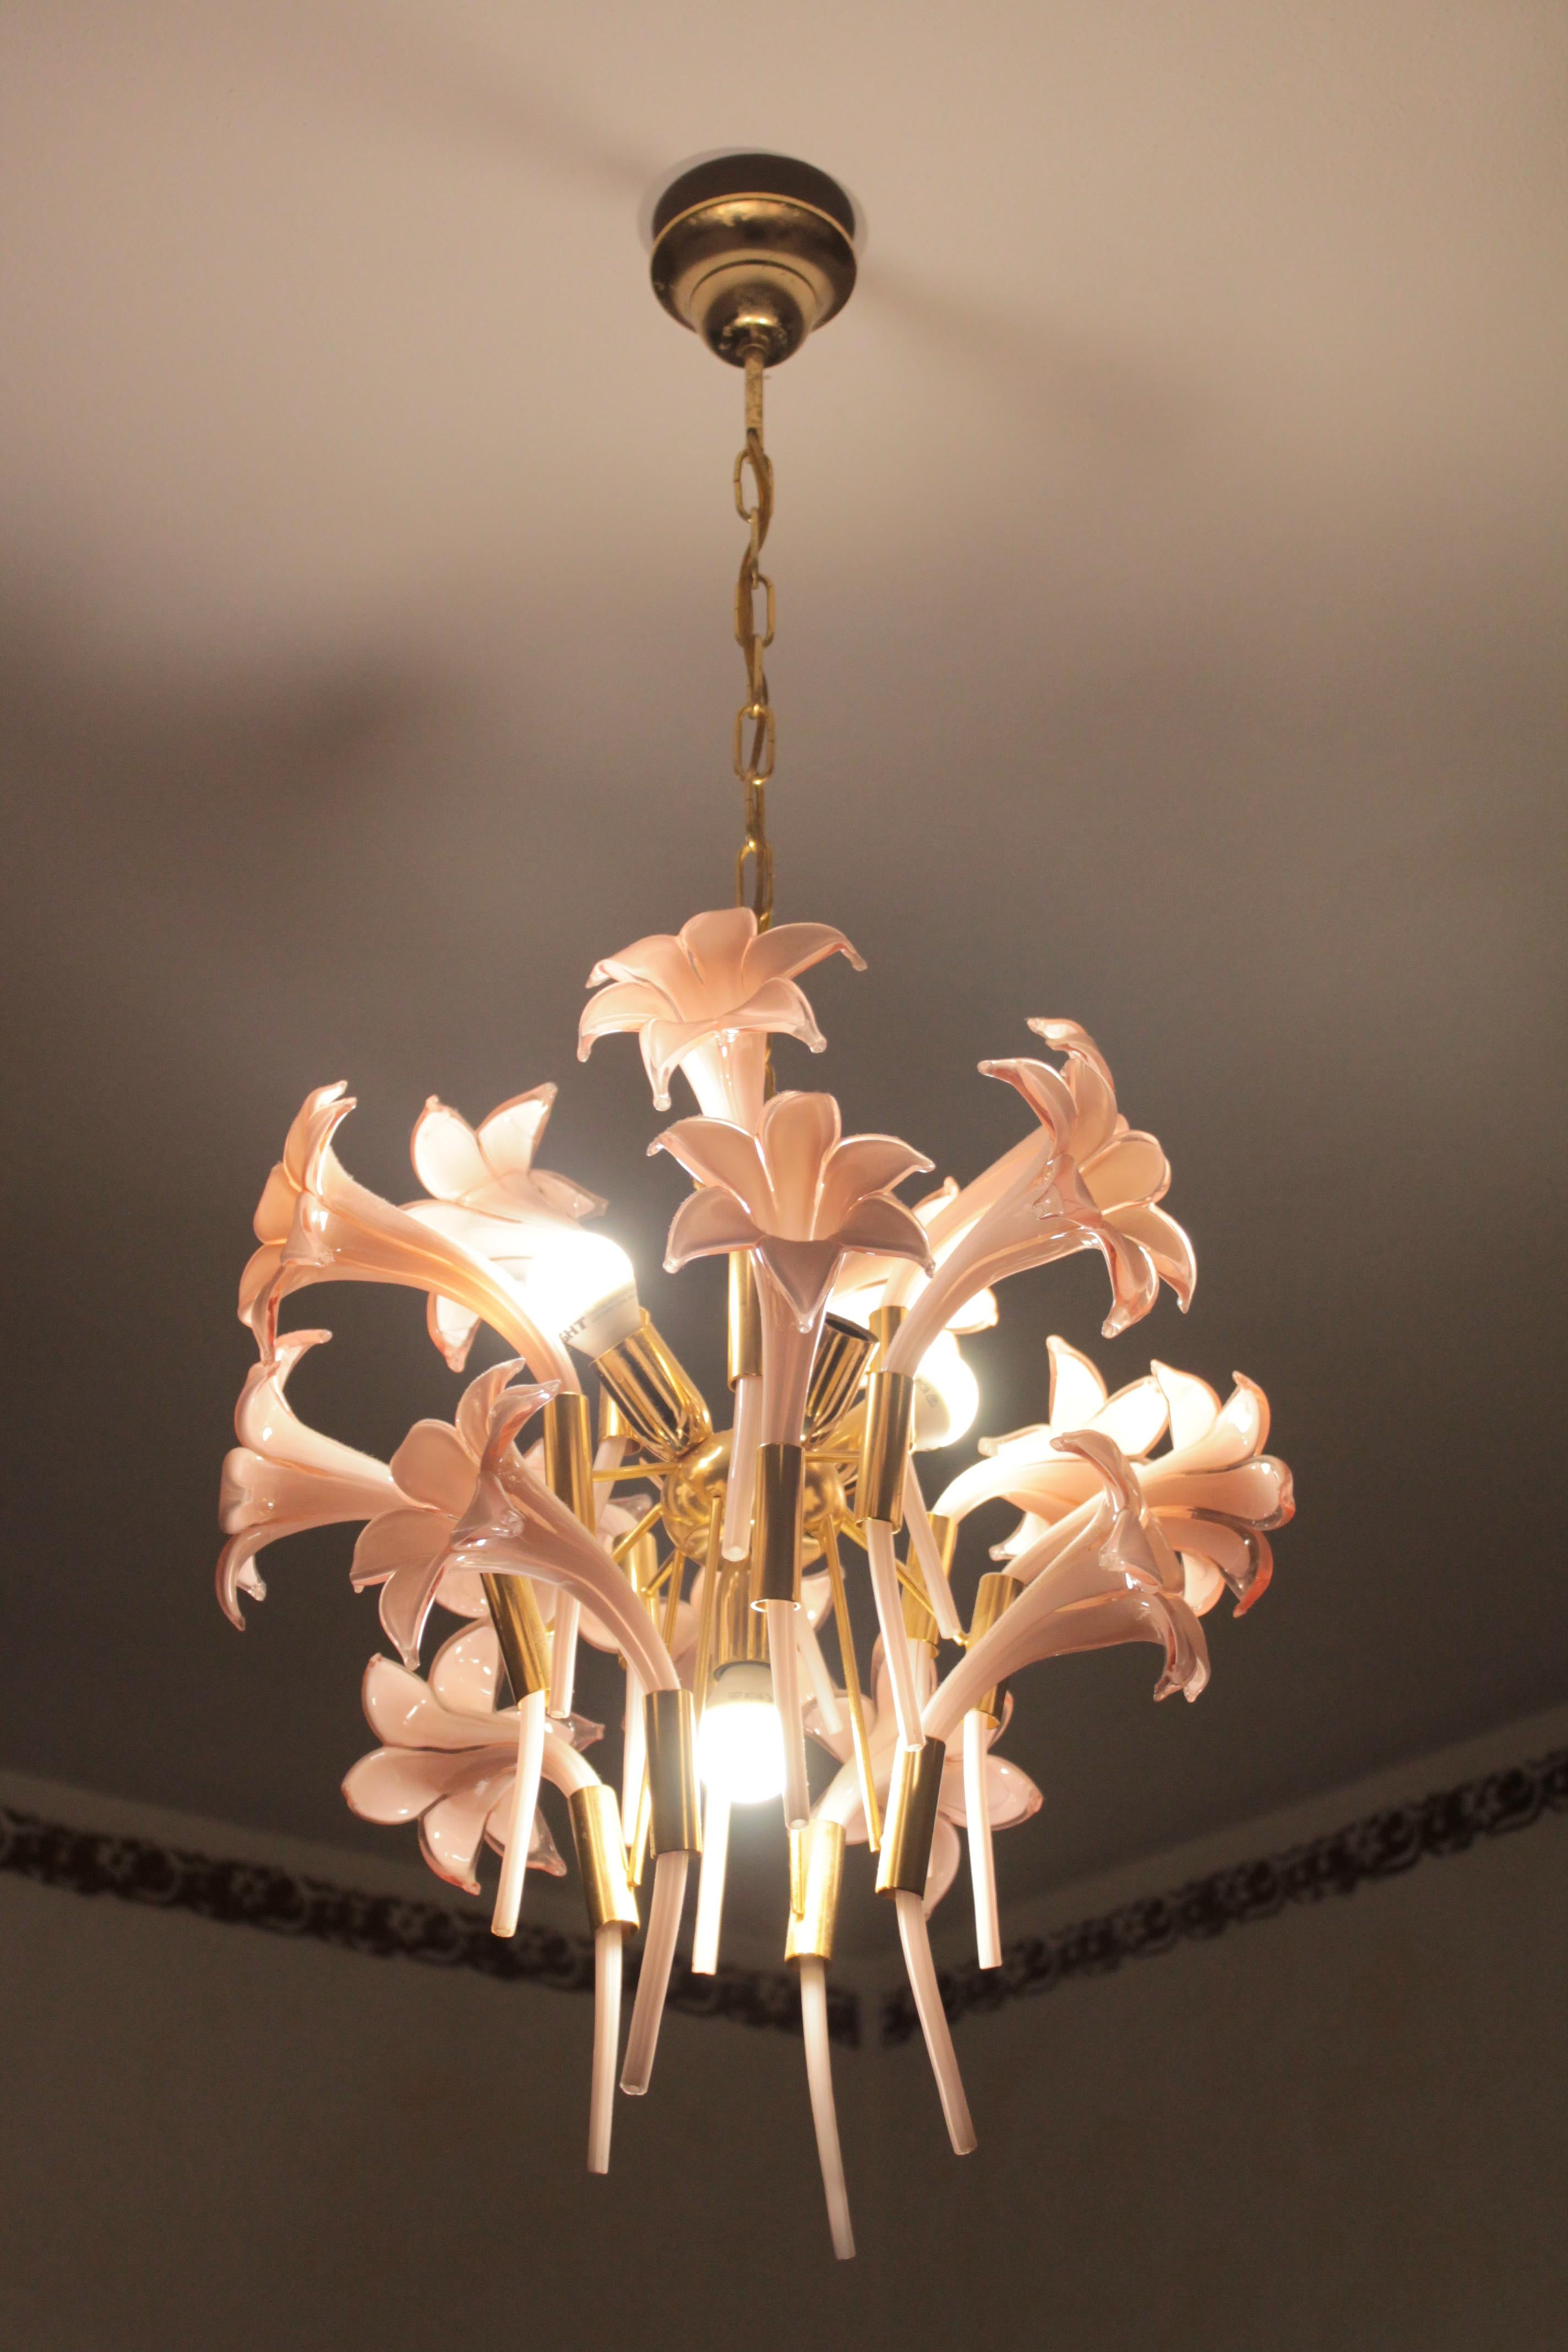 Pretty gold pink round chandelier Murano Franco Luce design 1970s Italian design flowers.
A flower has a breaking line visible in the photo, not visible on the mounted chandelier.